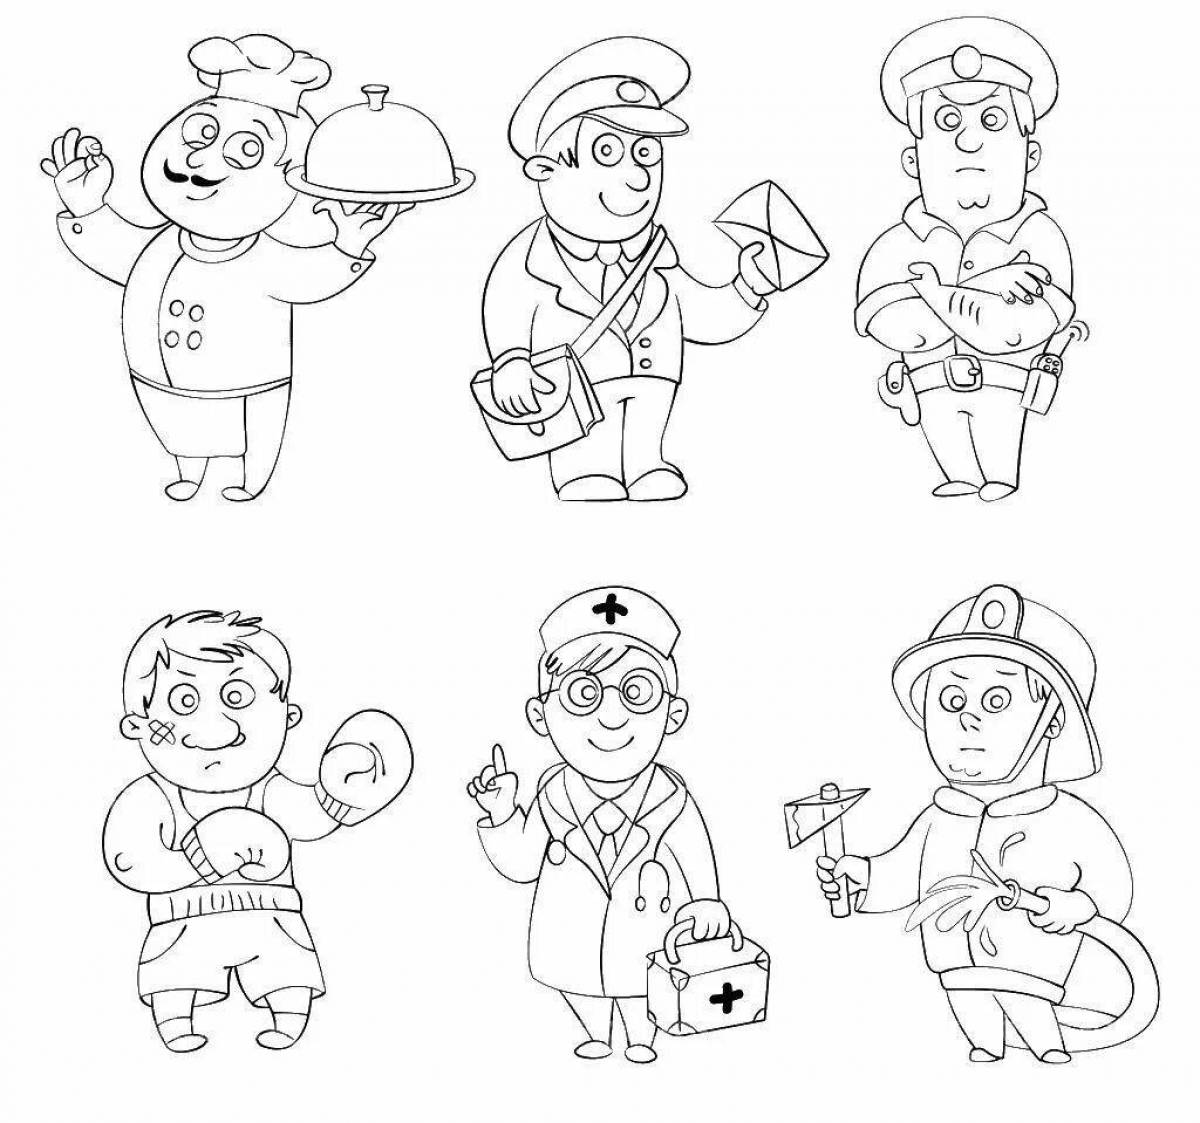 Fine class 1 profession coloring pages